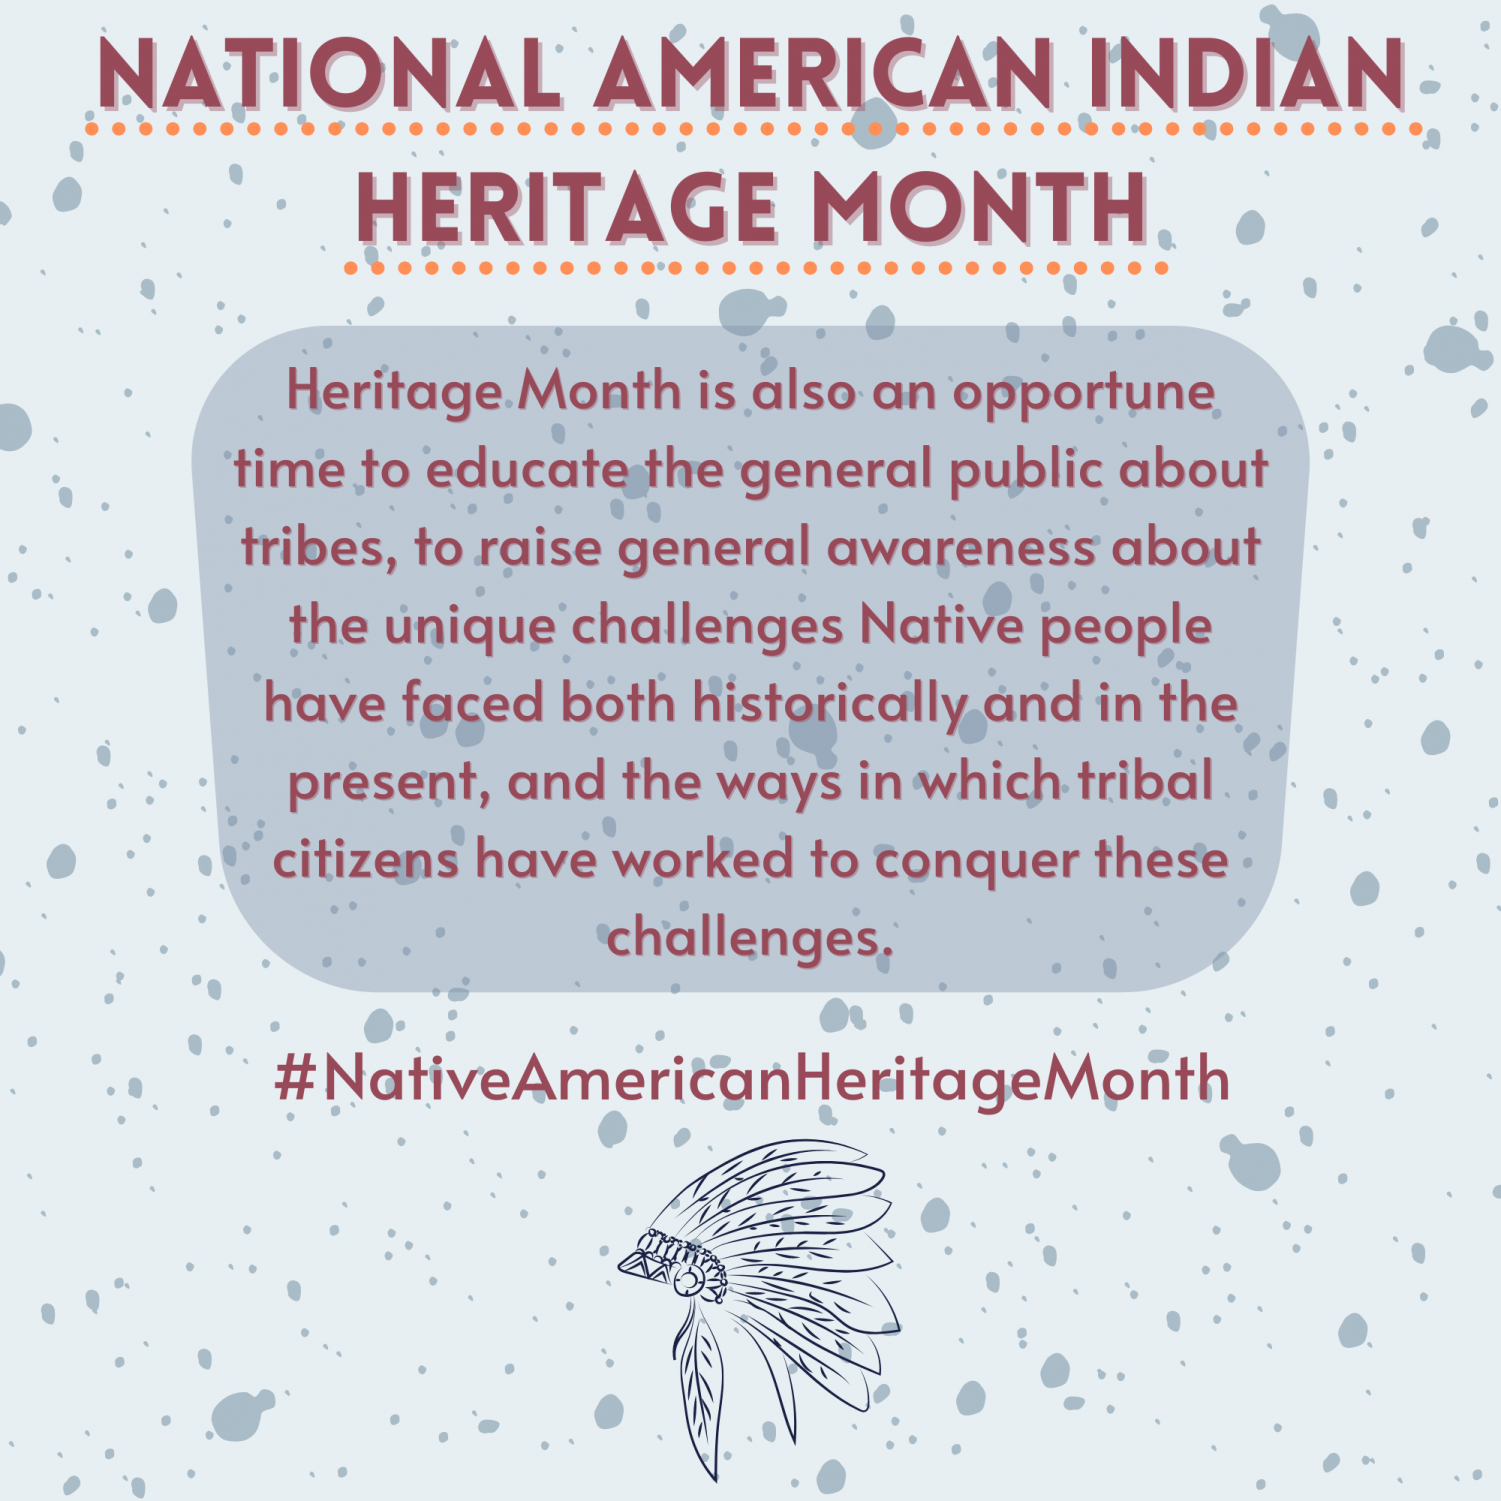 National+American+Indian+Heritage+Month